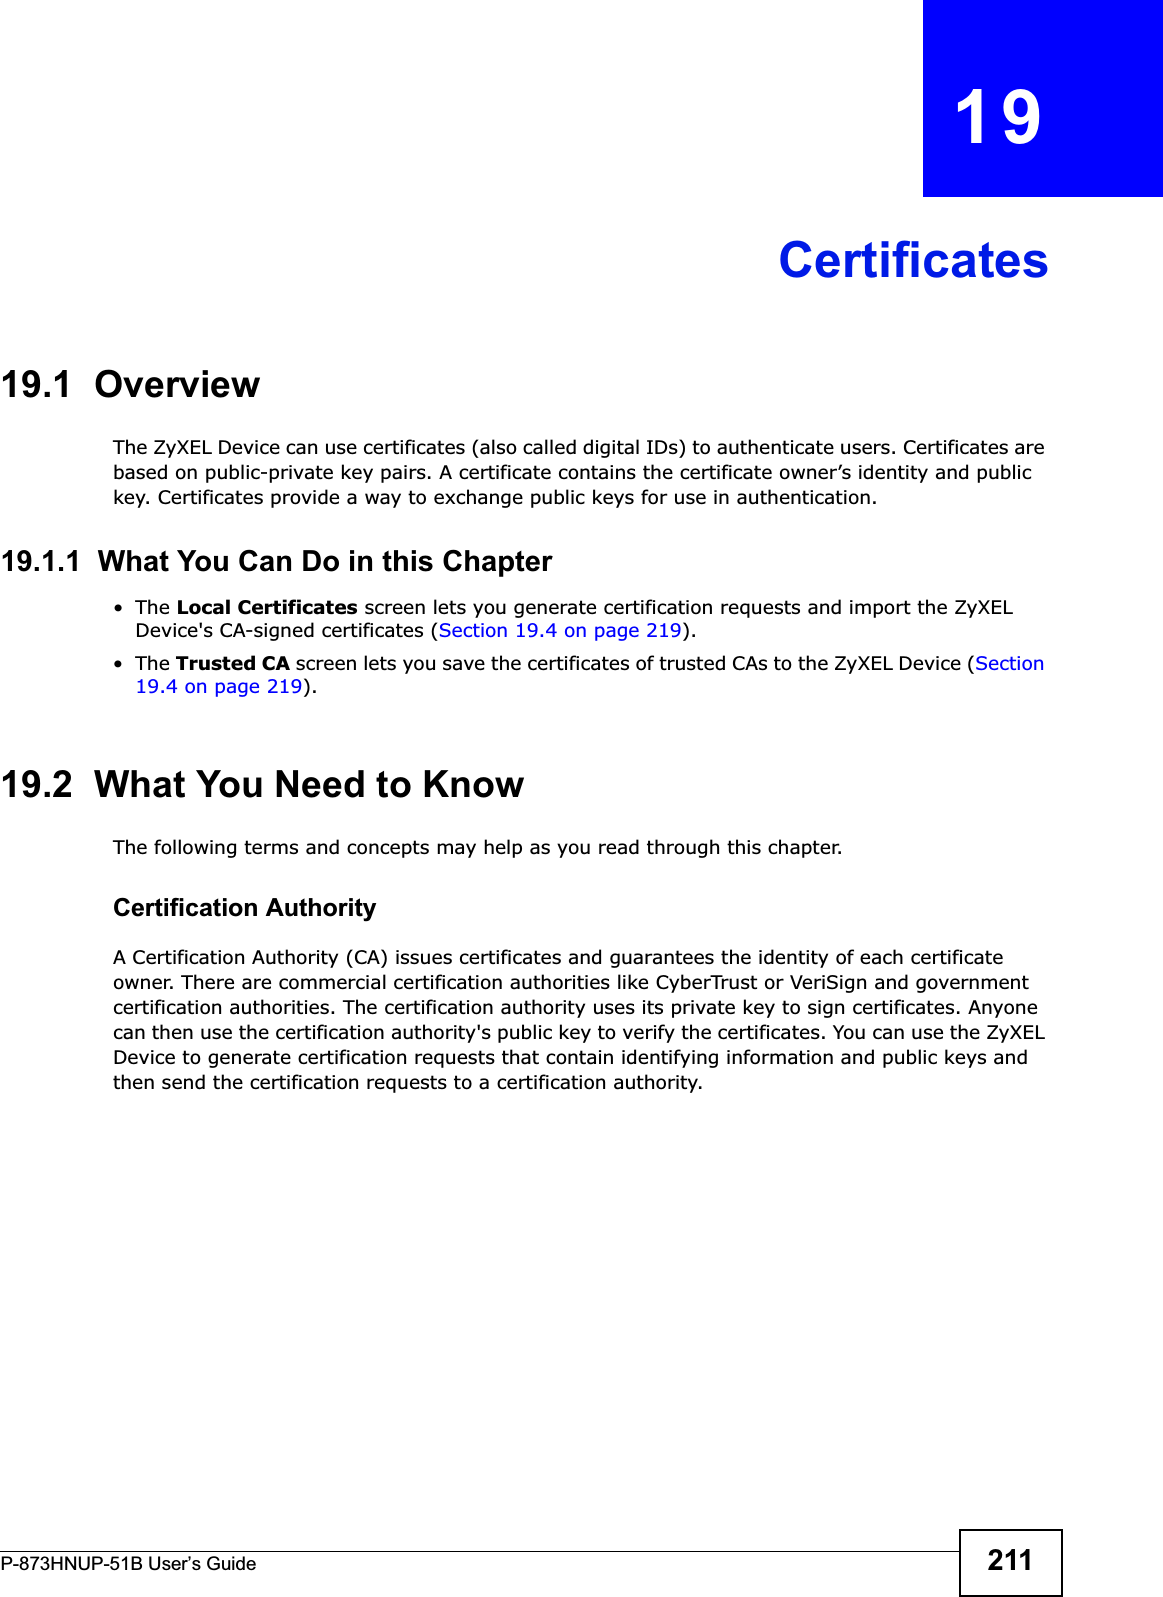 P-873HNUP-51B User’s Guide 211CHAPTER   19Certificates19.1  OverviewThe ZyXEL Device can use certificates (also called digital IDs) to authenticate users. Certificates are based on public-private key pairs. A certificate contains the certificate owner’s identity and public key. Certificates provide a way to exchange public keys for use in authentication. 19.1.1  What You Can Do in this Chapter•The Local Certificates screen lets you generate certification requests and import the ZyXEL Device&apos;s CA-signed certificates (Section 19.4 on page 219).•The Trusted CA screen lets you save the certificates of trusted CAs to the ZyXEL Device (Section 19.4 on page 219).19.2  What You Need to KnowThe following terms and concepts may help as you read through this chapter.Certification Authority A Certification Authority (CA) issues certificates and guarantees the identity of each certificate owner. There are commercial certification authorities like CyberTrust or VeriSign and government certification authorities. The certification authority uses its private key to sign certificates. Anyone can then use the certification authority&apos;s public key to verify the certificates. You can use the ZyXEL Device to generate certification requests that contain identifying information and public keys and then send the certification requests to a certification authority.